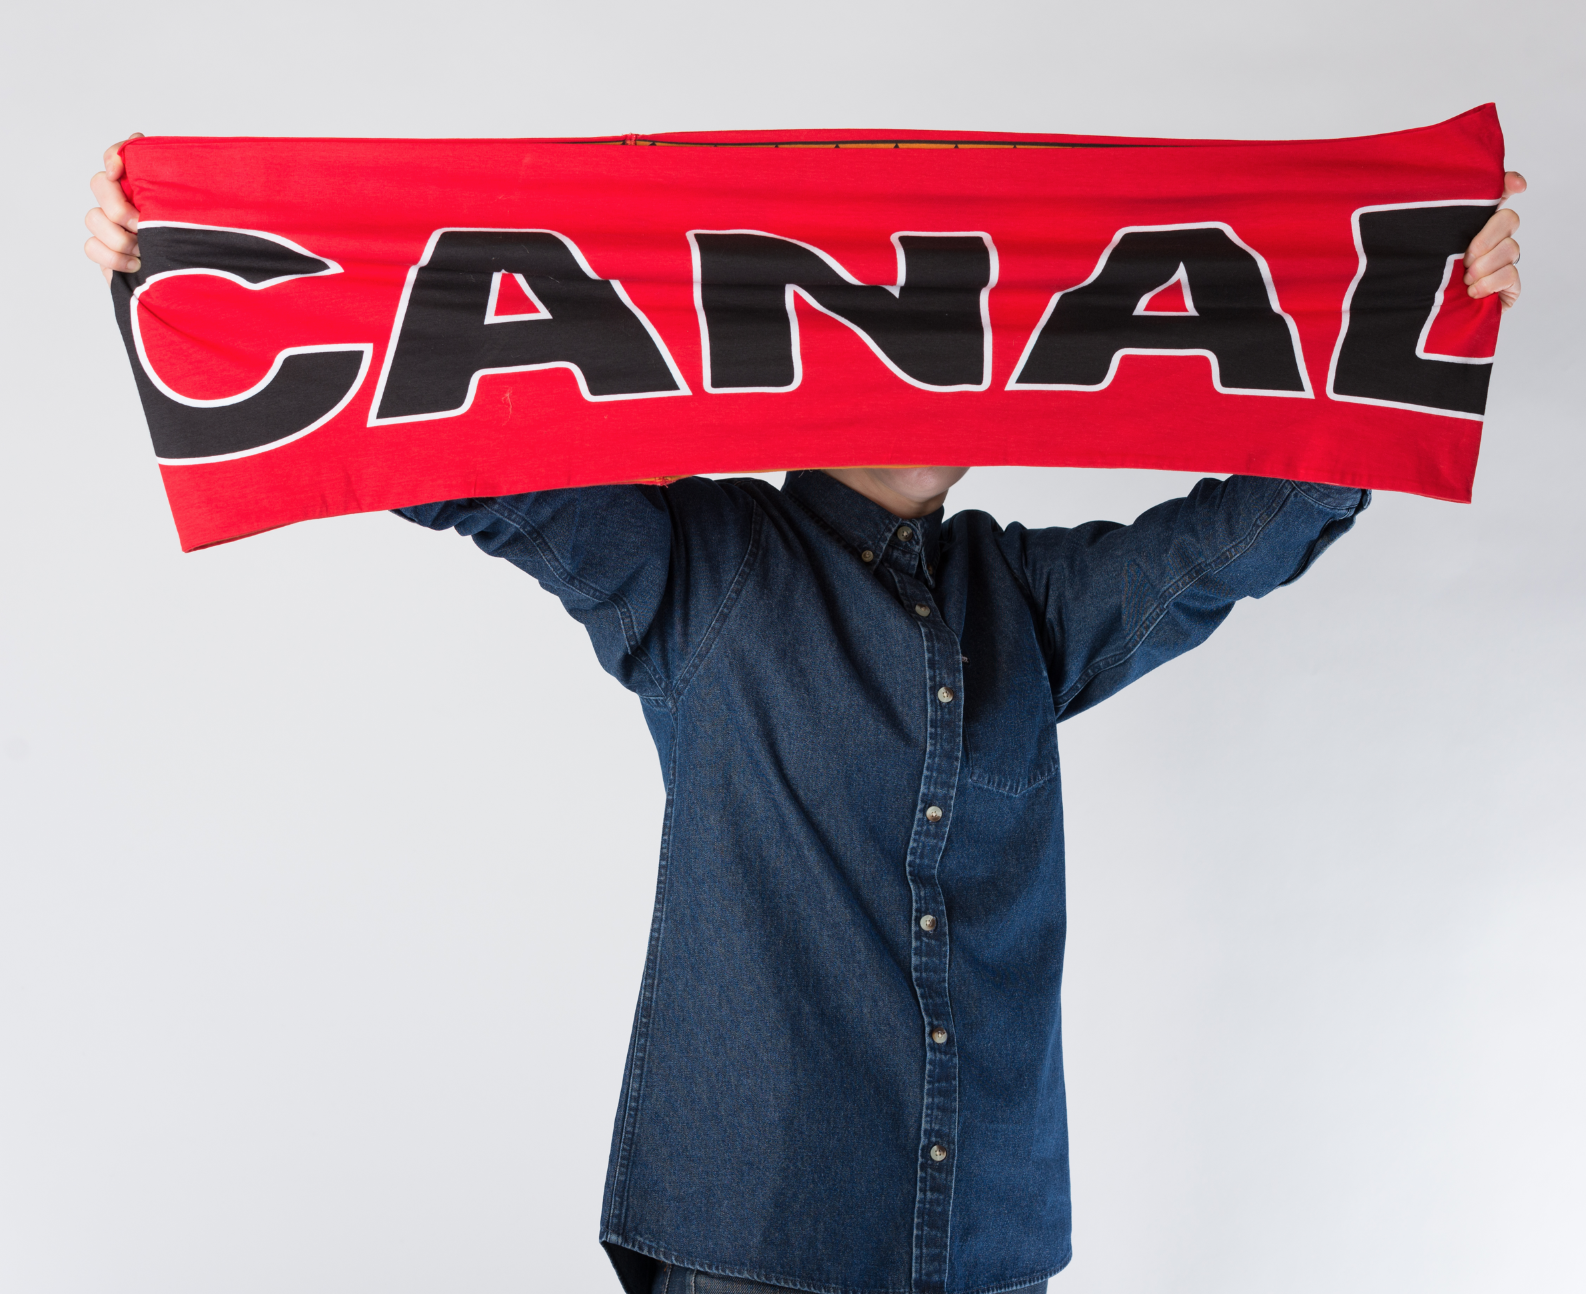 The Unity Scarf